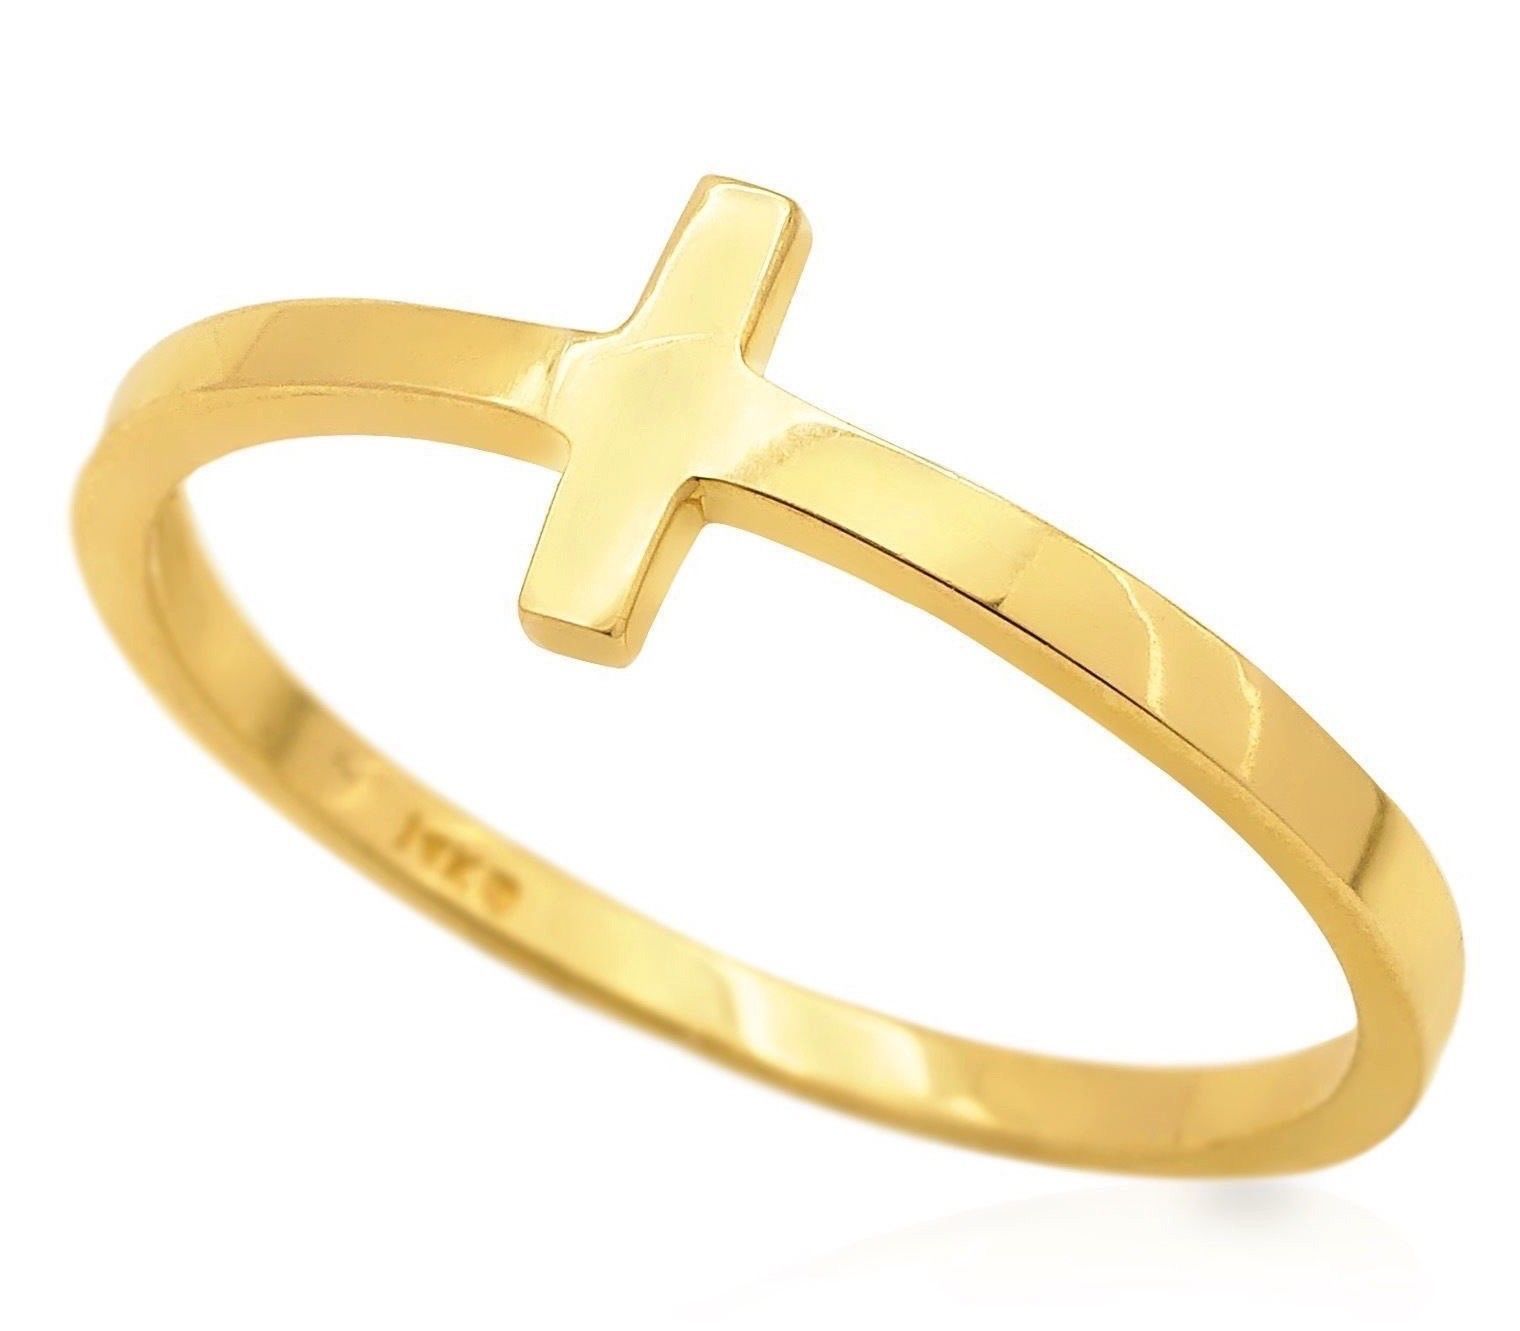 Primary image for 14K Solid Yellow Gold Polished Sideways Cross Design Ring Size 5 To 8